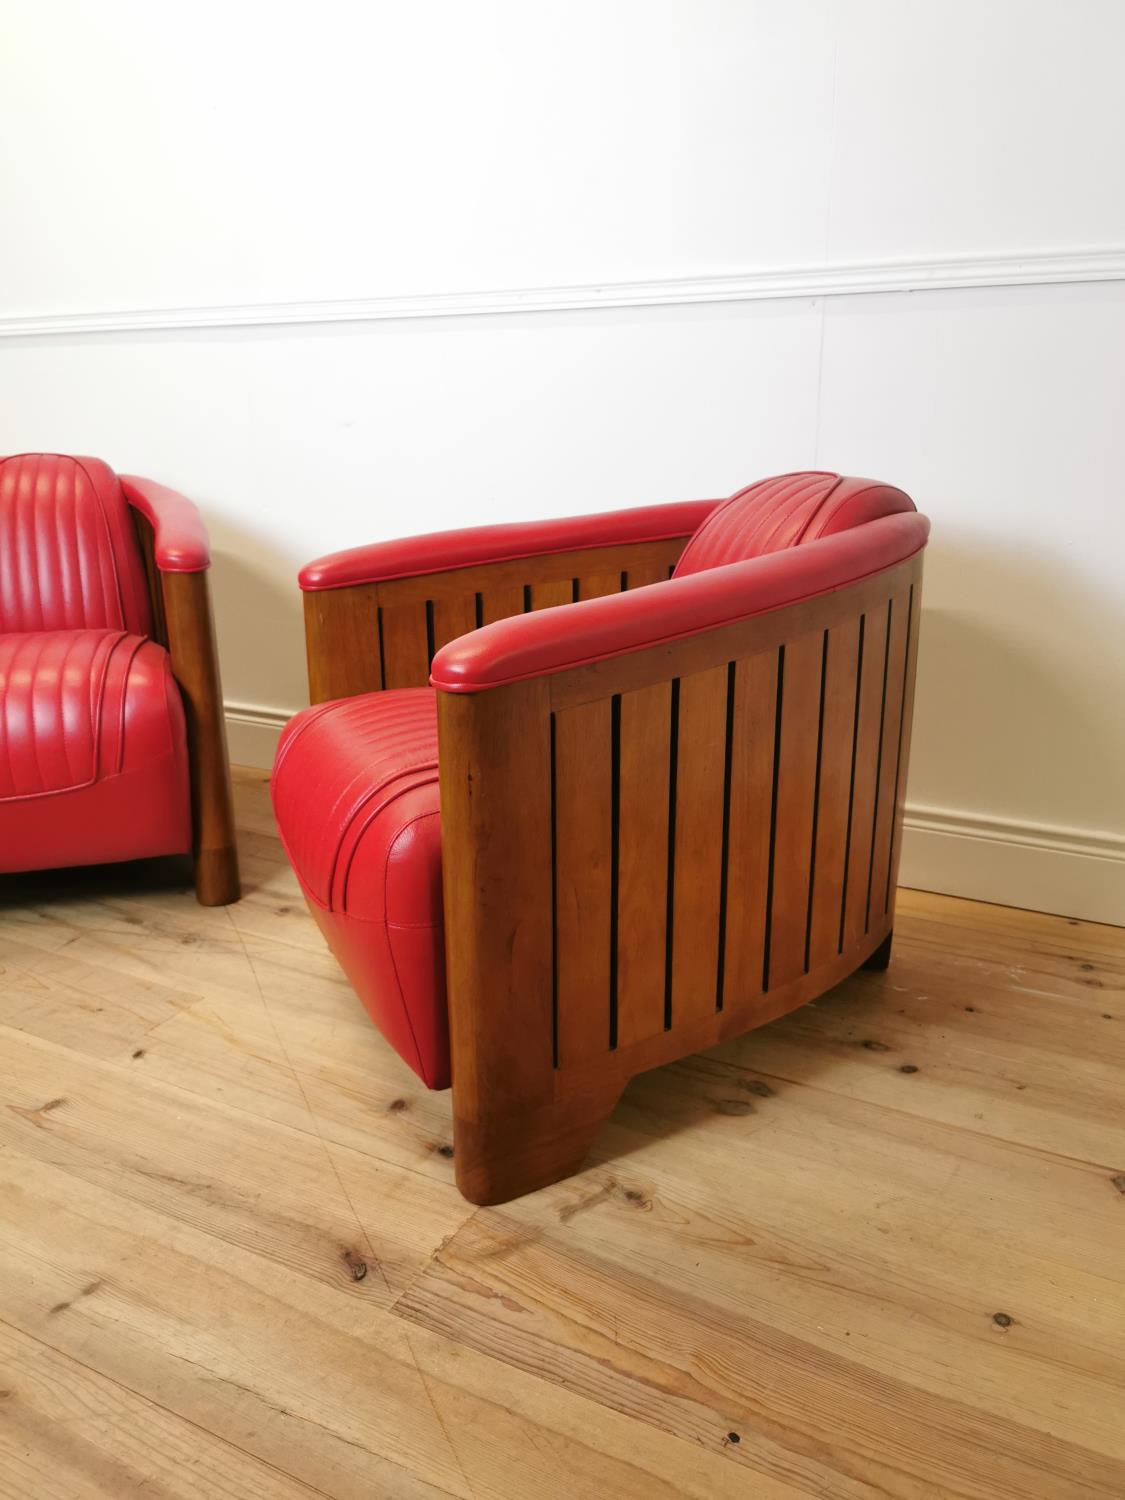 Pair of good quality cherrywood and leather upholstered Aviator club chairs - Image 2 of 4